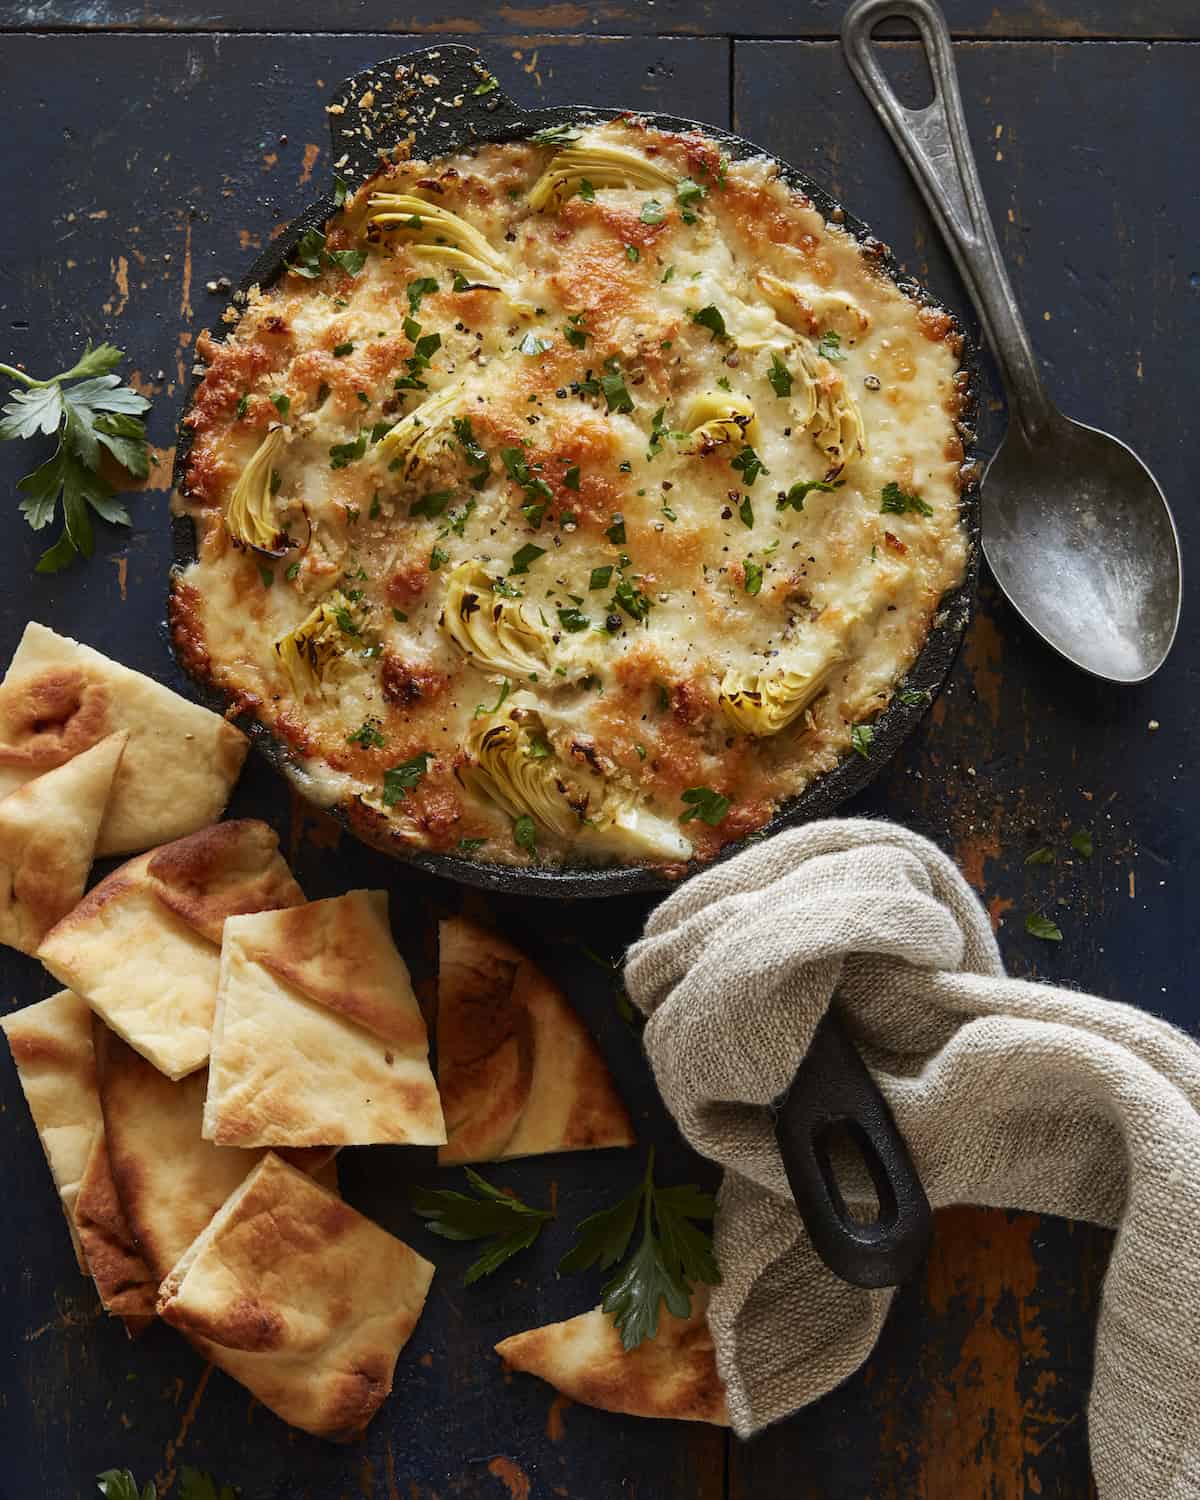 A skillet with cheesy artichoke dip and some cut up naan bread on its side, a spoon and a dish cloth wrapping up the skillet's handle.